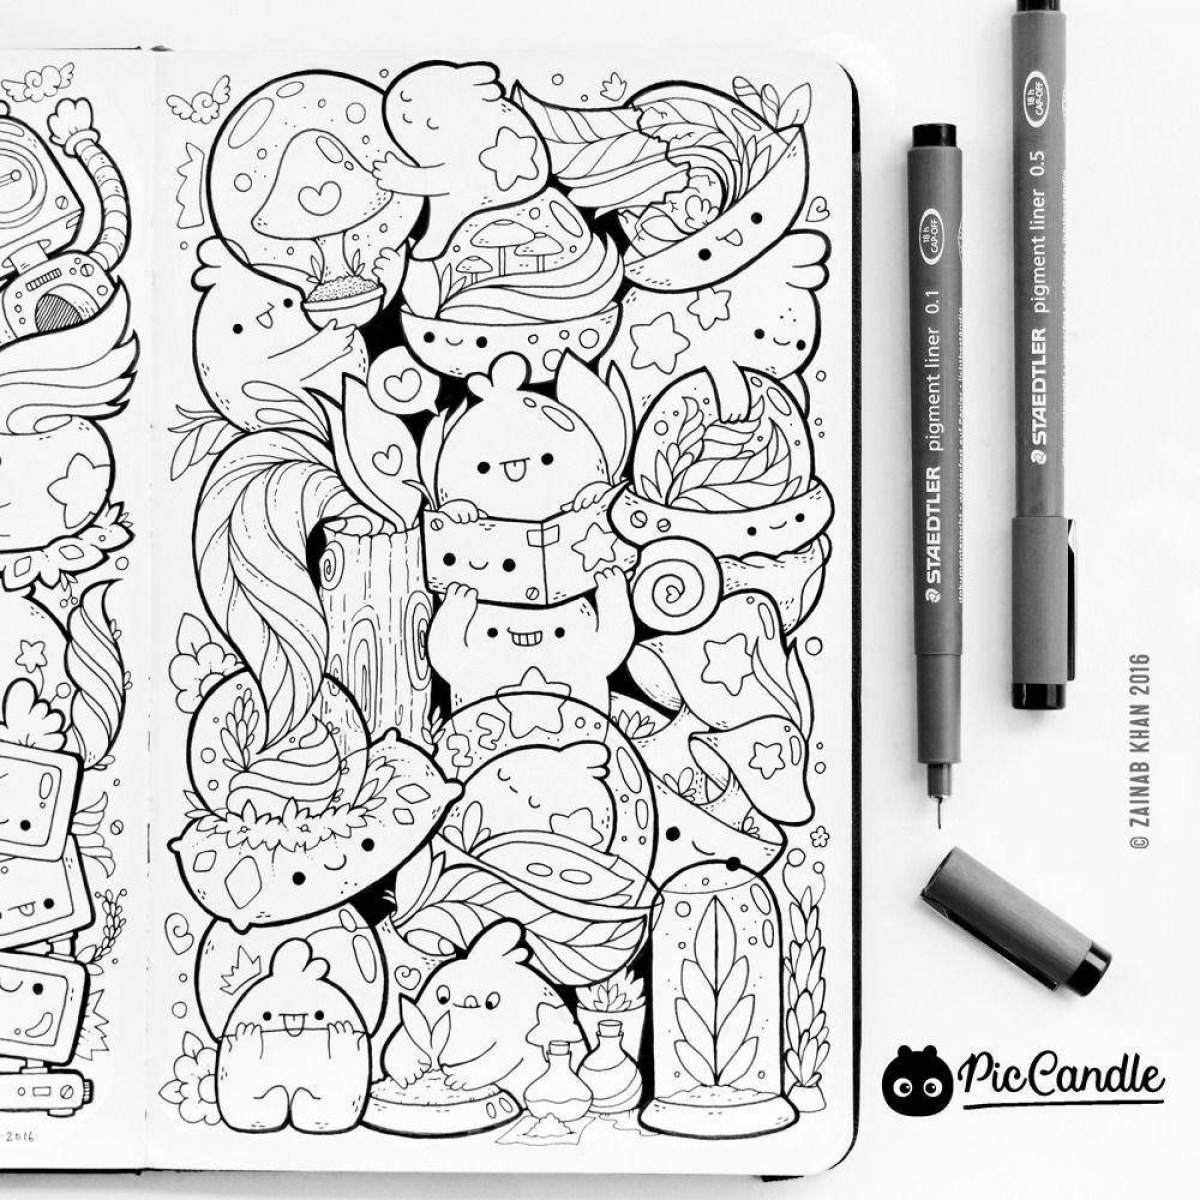 Amazing coloring book